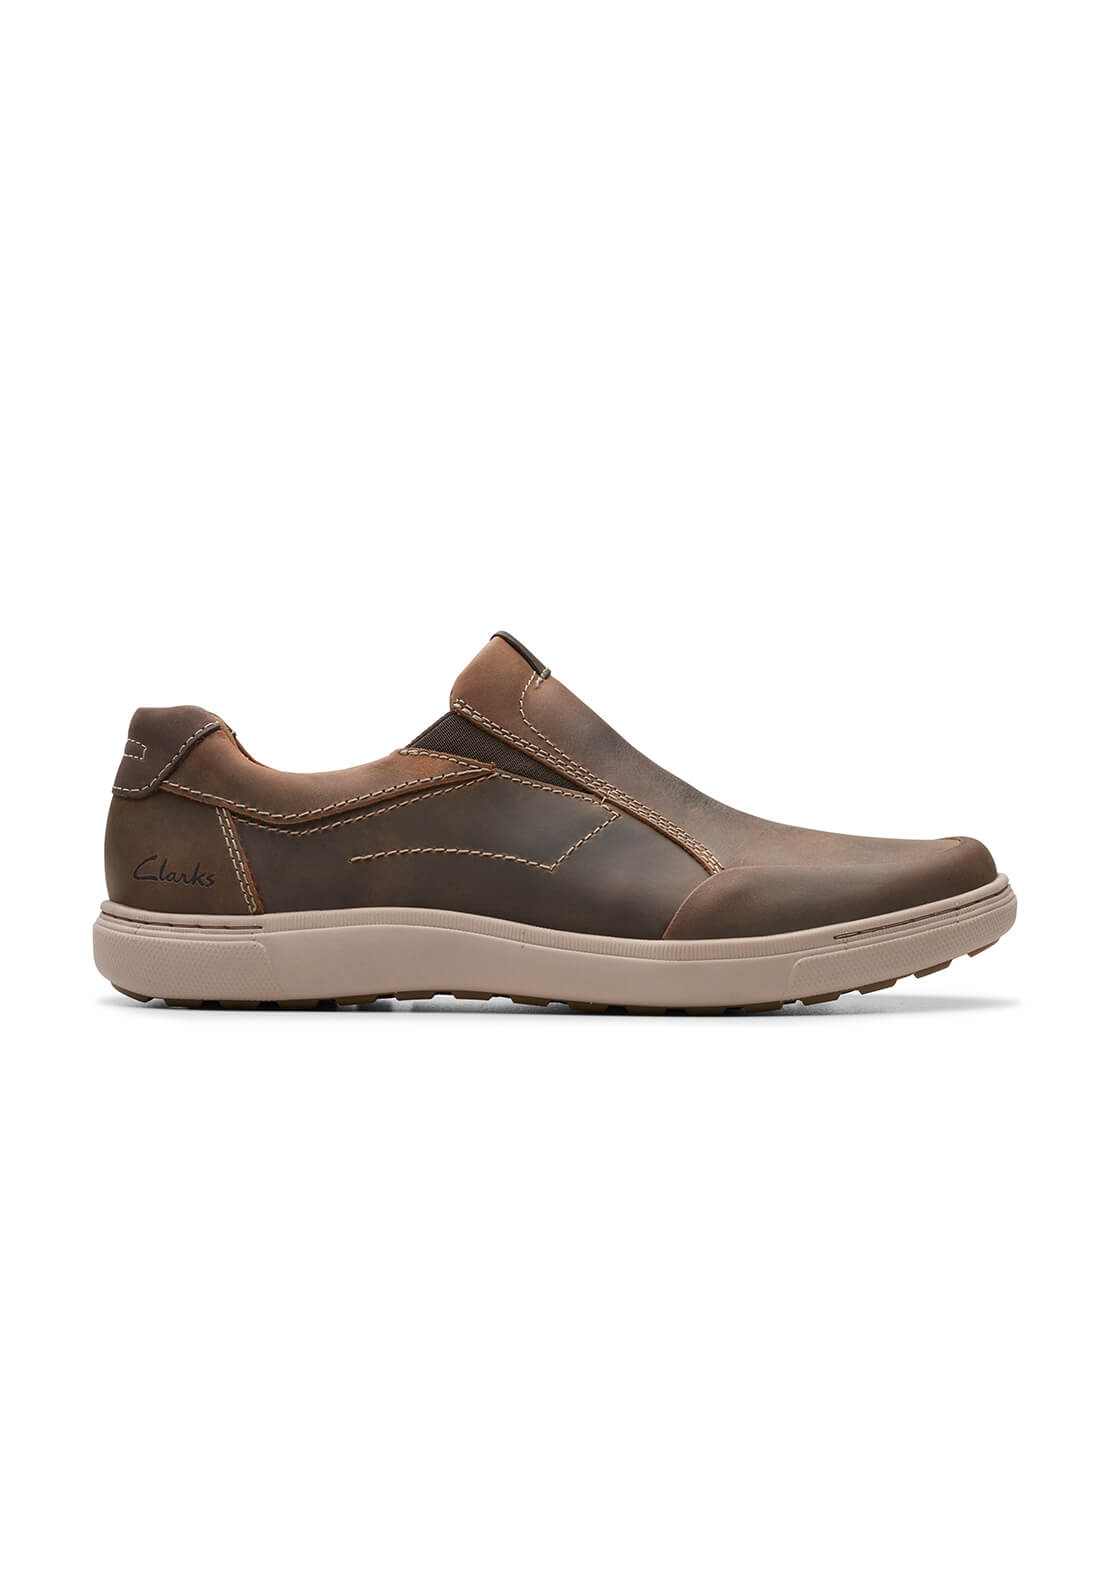 Clarks Mapstone Step Shoe 6 Shaws Department Stores